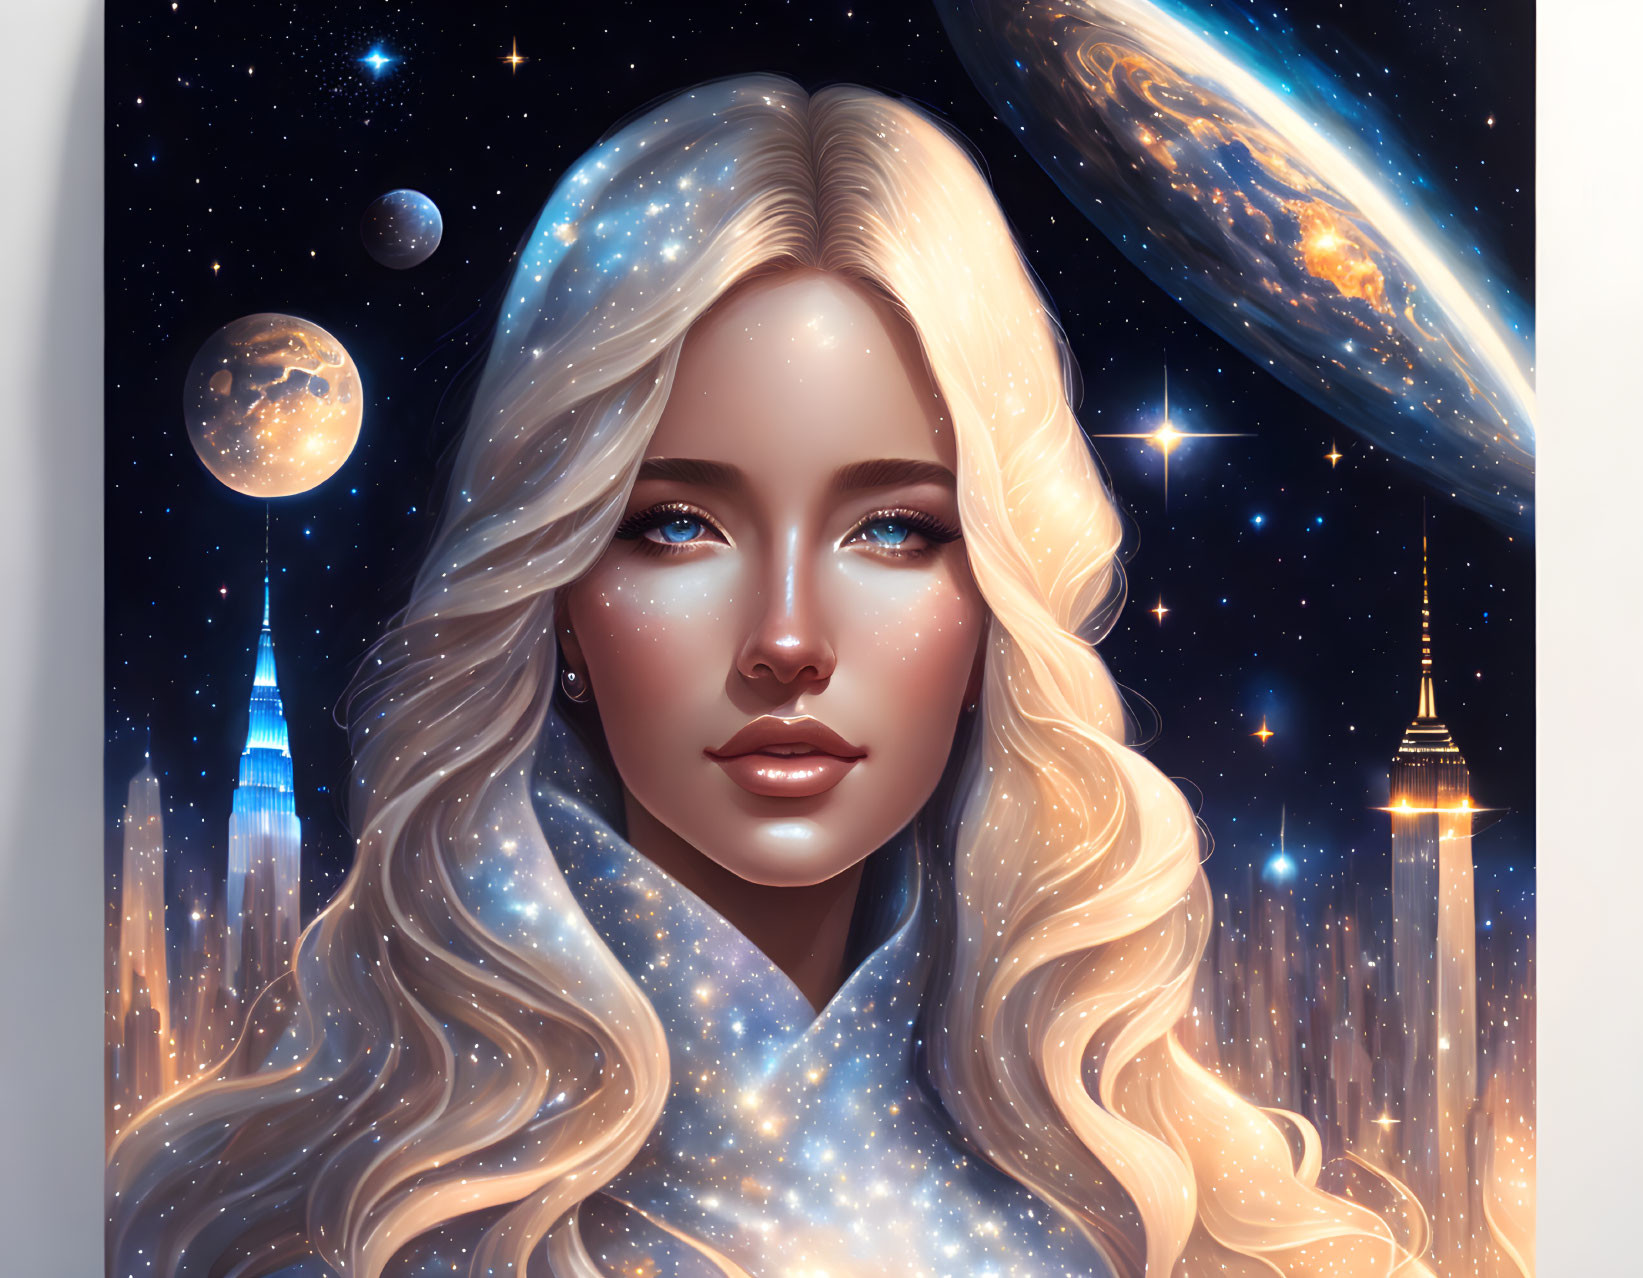 Digital portrait of woman with cosmic-themed hair merging into starry night sky, planets, and cityscape